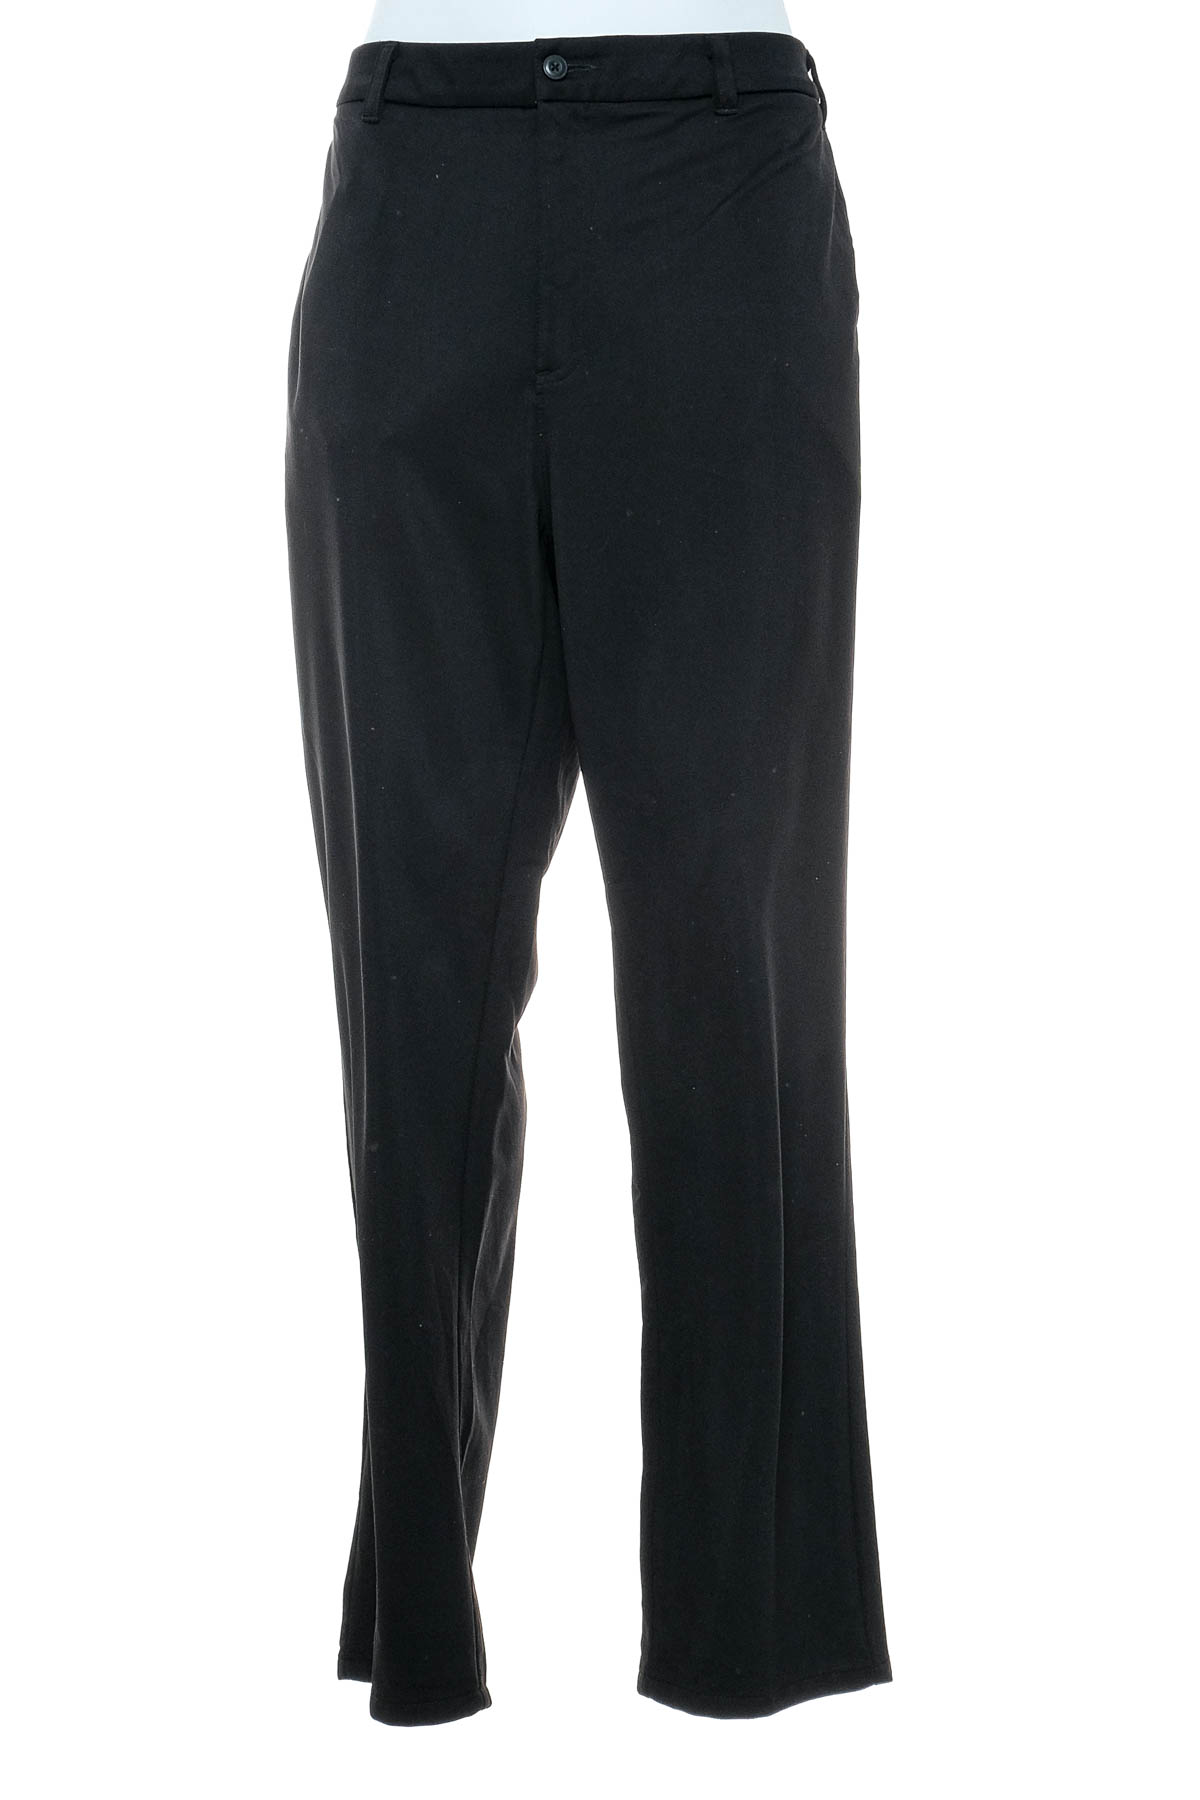 Men's trousers - Nicklaus - 0